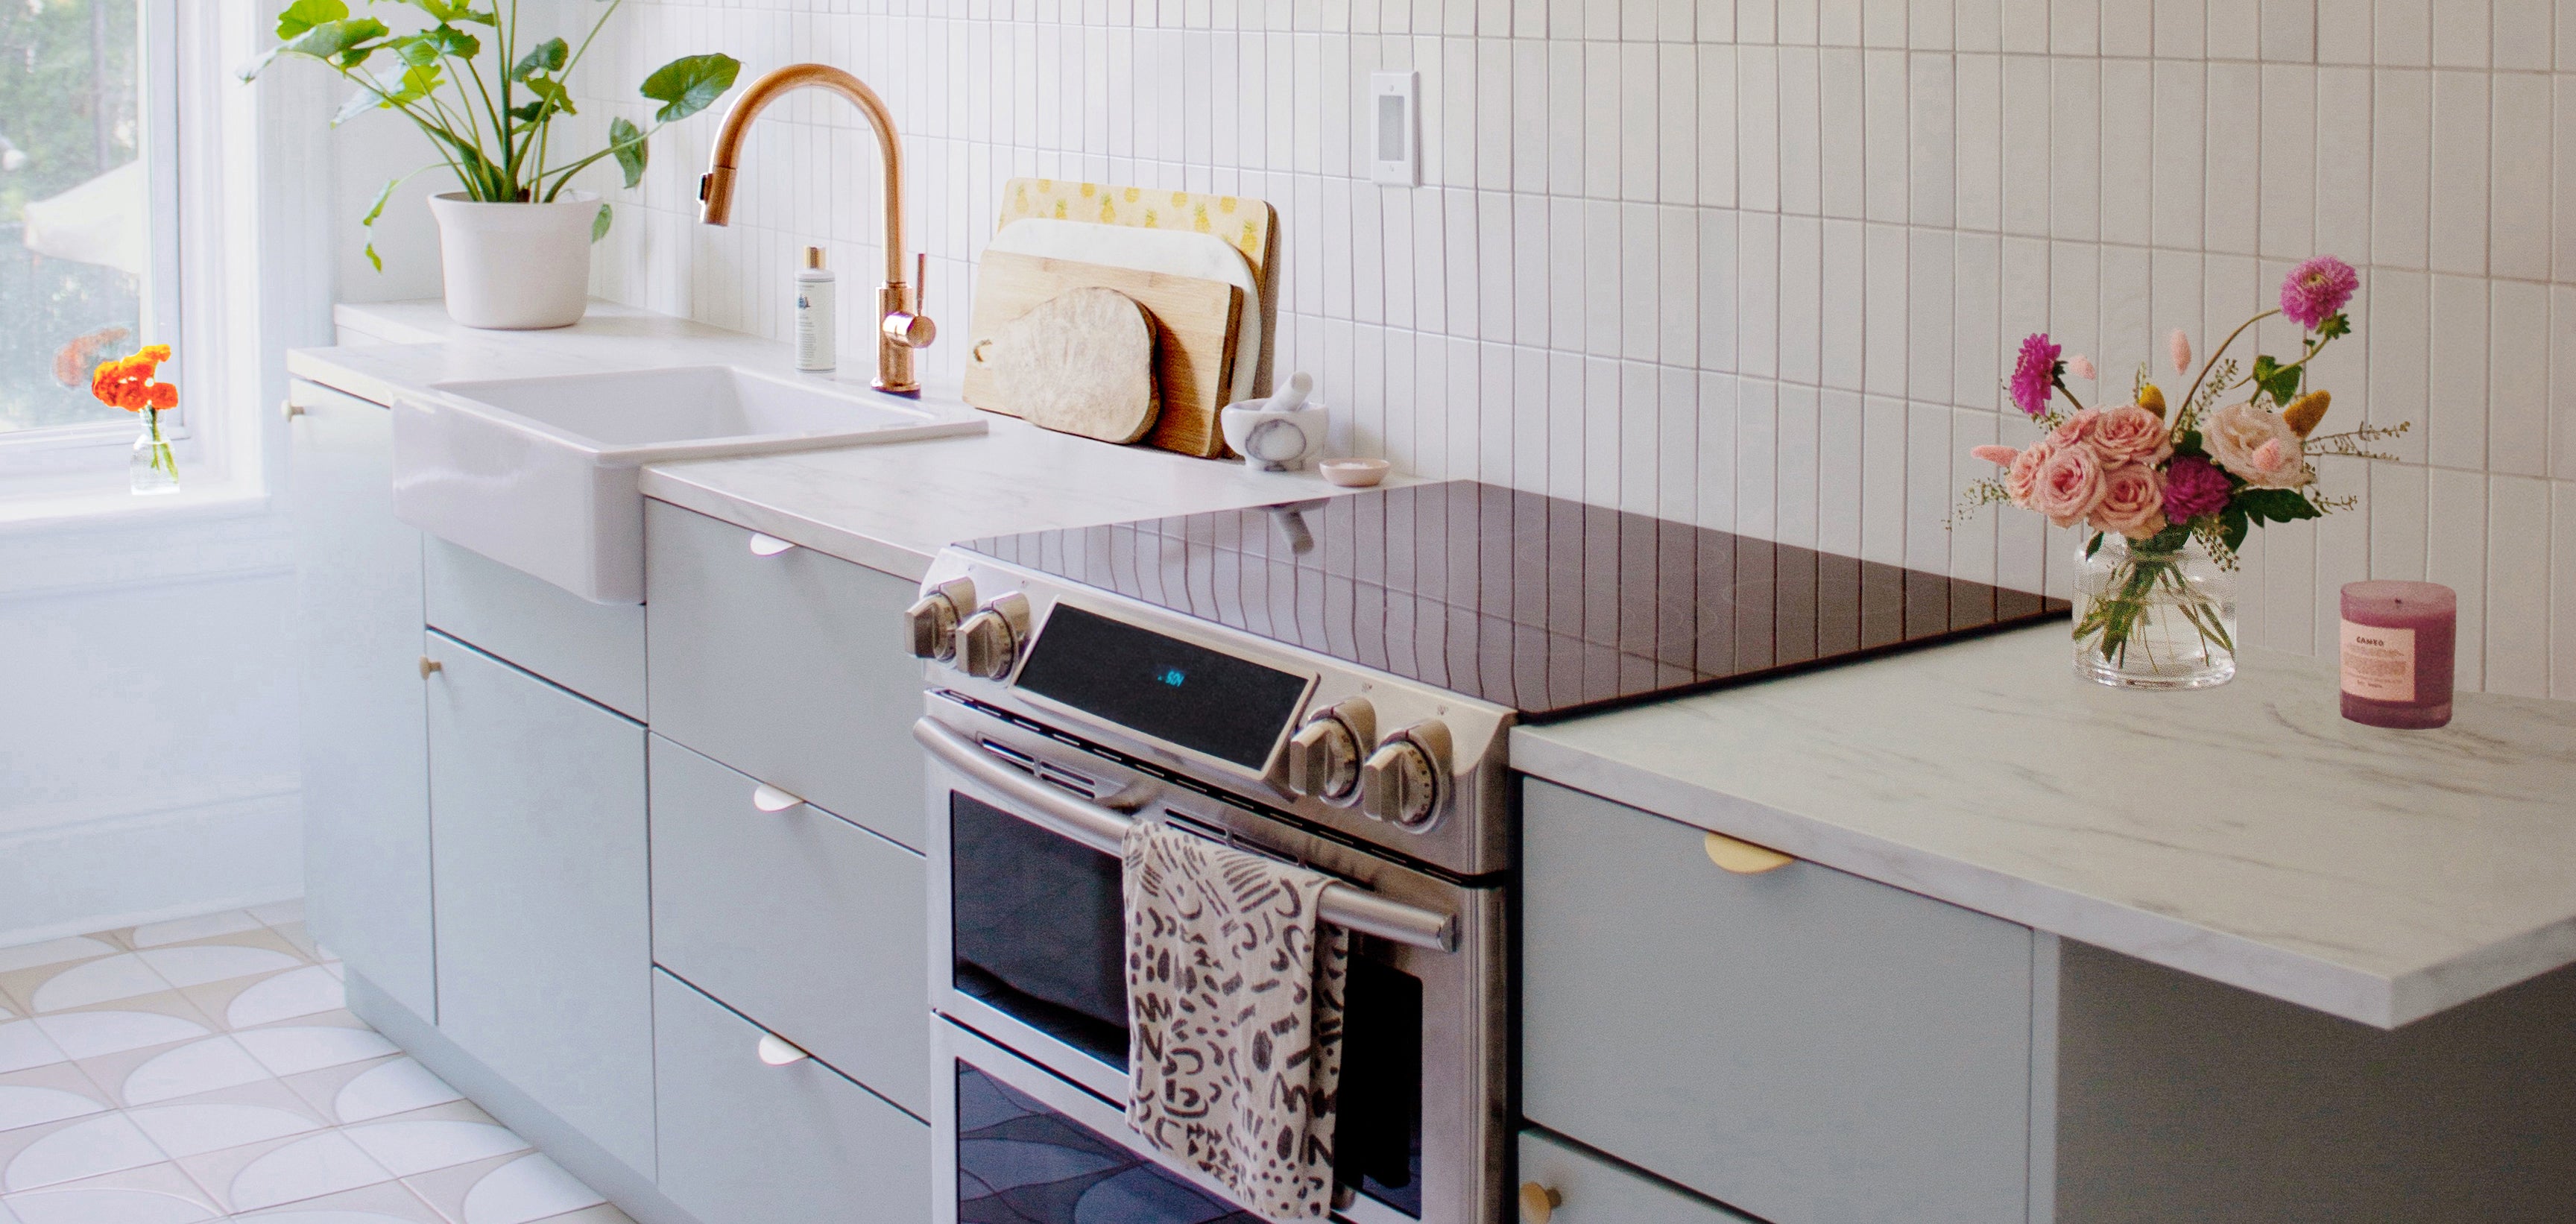 A Chic, Effortless Kitchen Reno Using Agave Slab